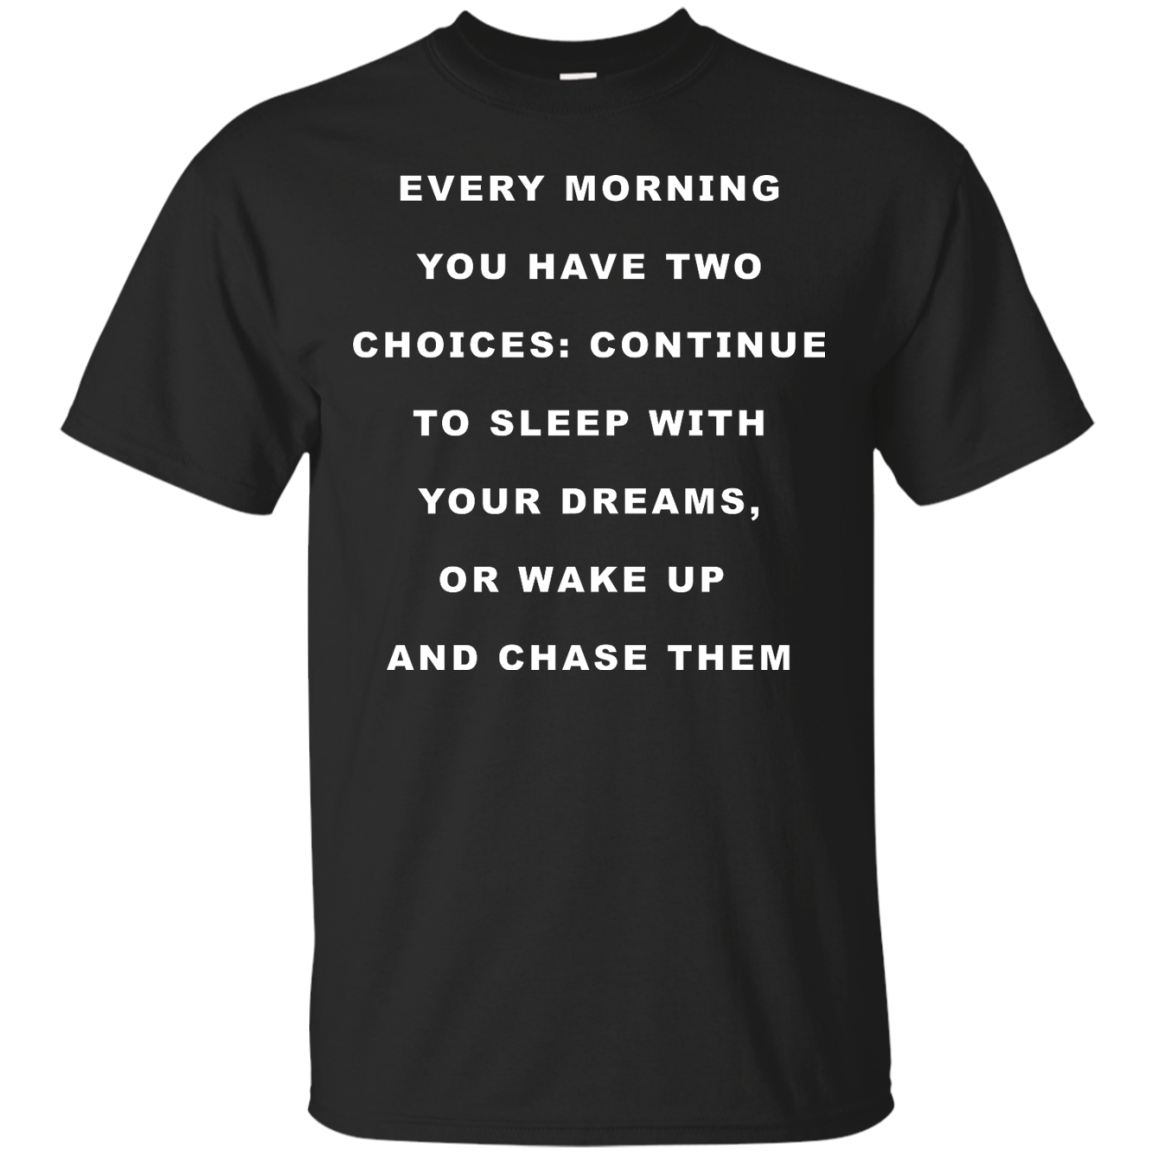 Continue to sleep with your dreams or wake up and chase them shirt